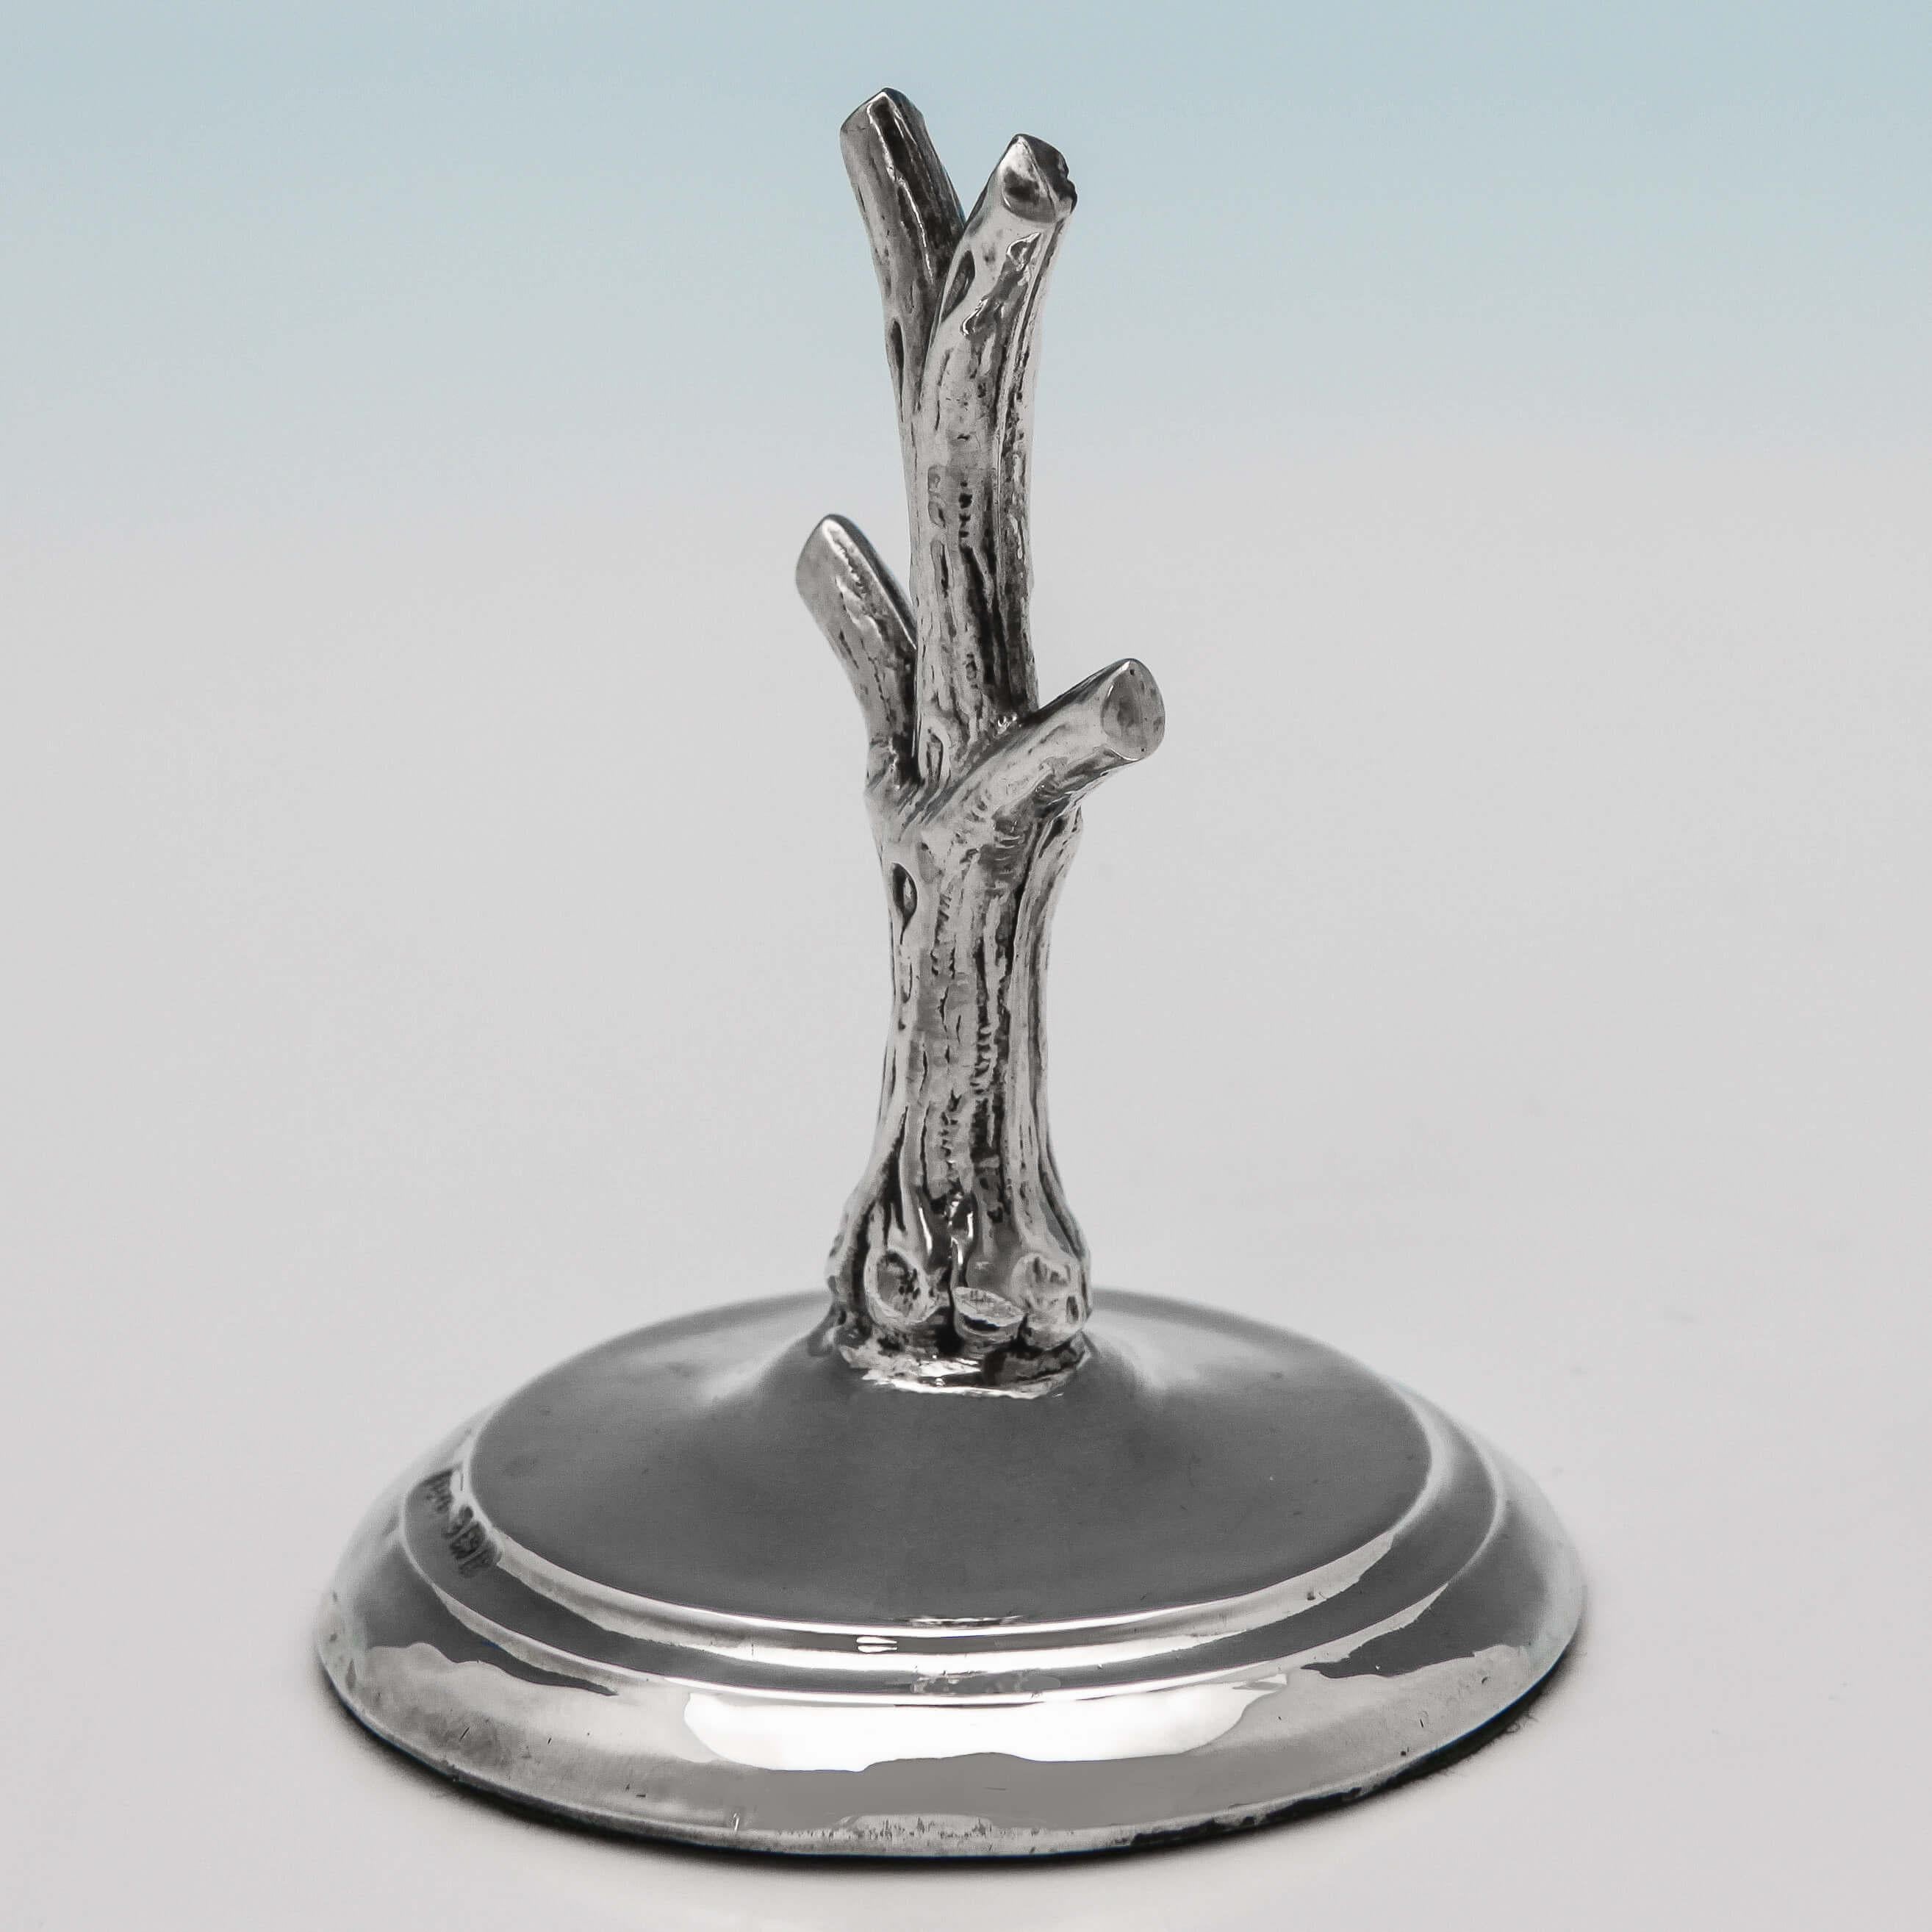 Hallmarked in Birmingham in 1905 by A. E. Goodby & Sons, this novelty, Edwardian antique, sterling silver ring tree, is modelled as a tree trunk, with branches to hold your rings. The ring tree measures 3.25